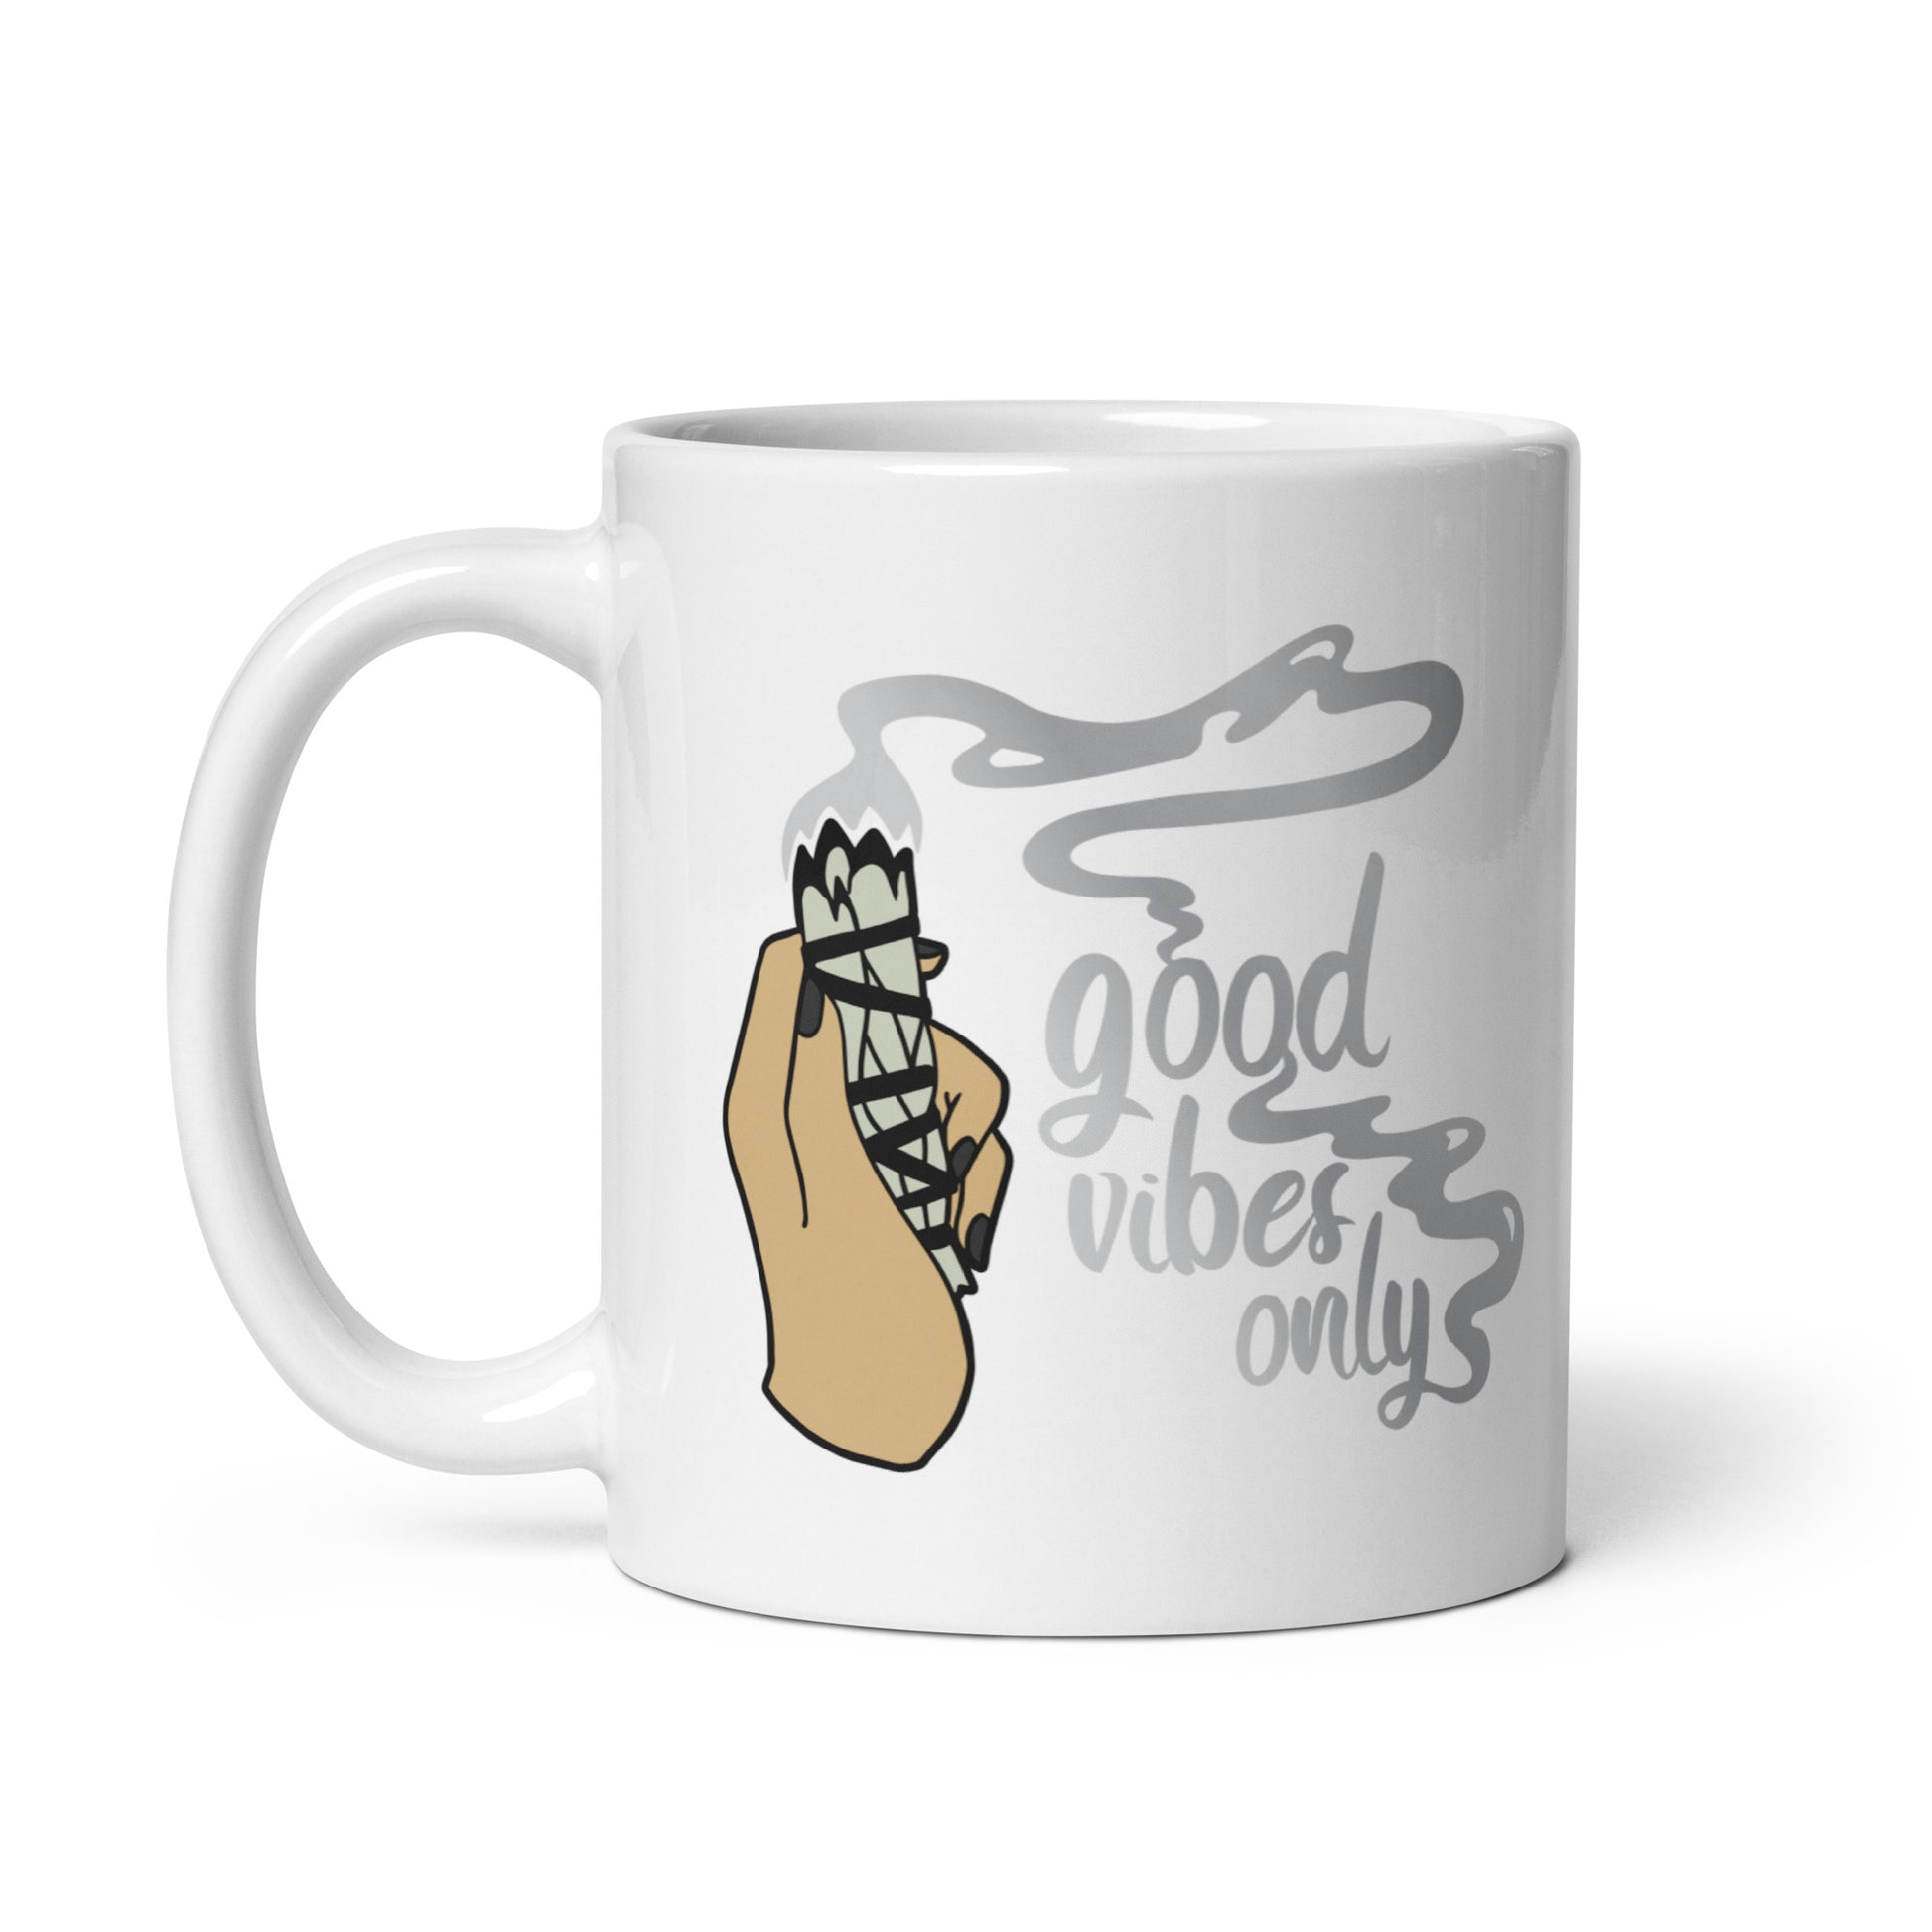 An 11 ounce white ceramic coffee mug featuring an illustration of a hand holding a sage smudge stick. Smoke flows from the tip of the sage and forms words that read "good vibes only"